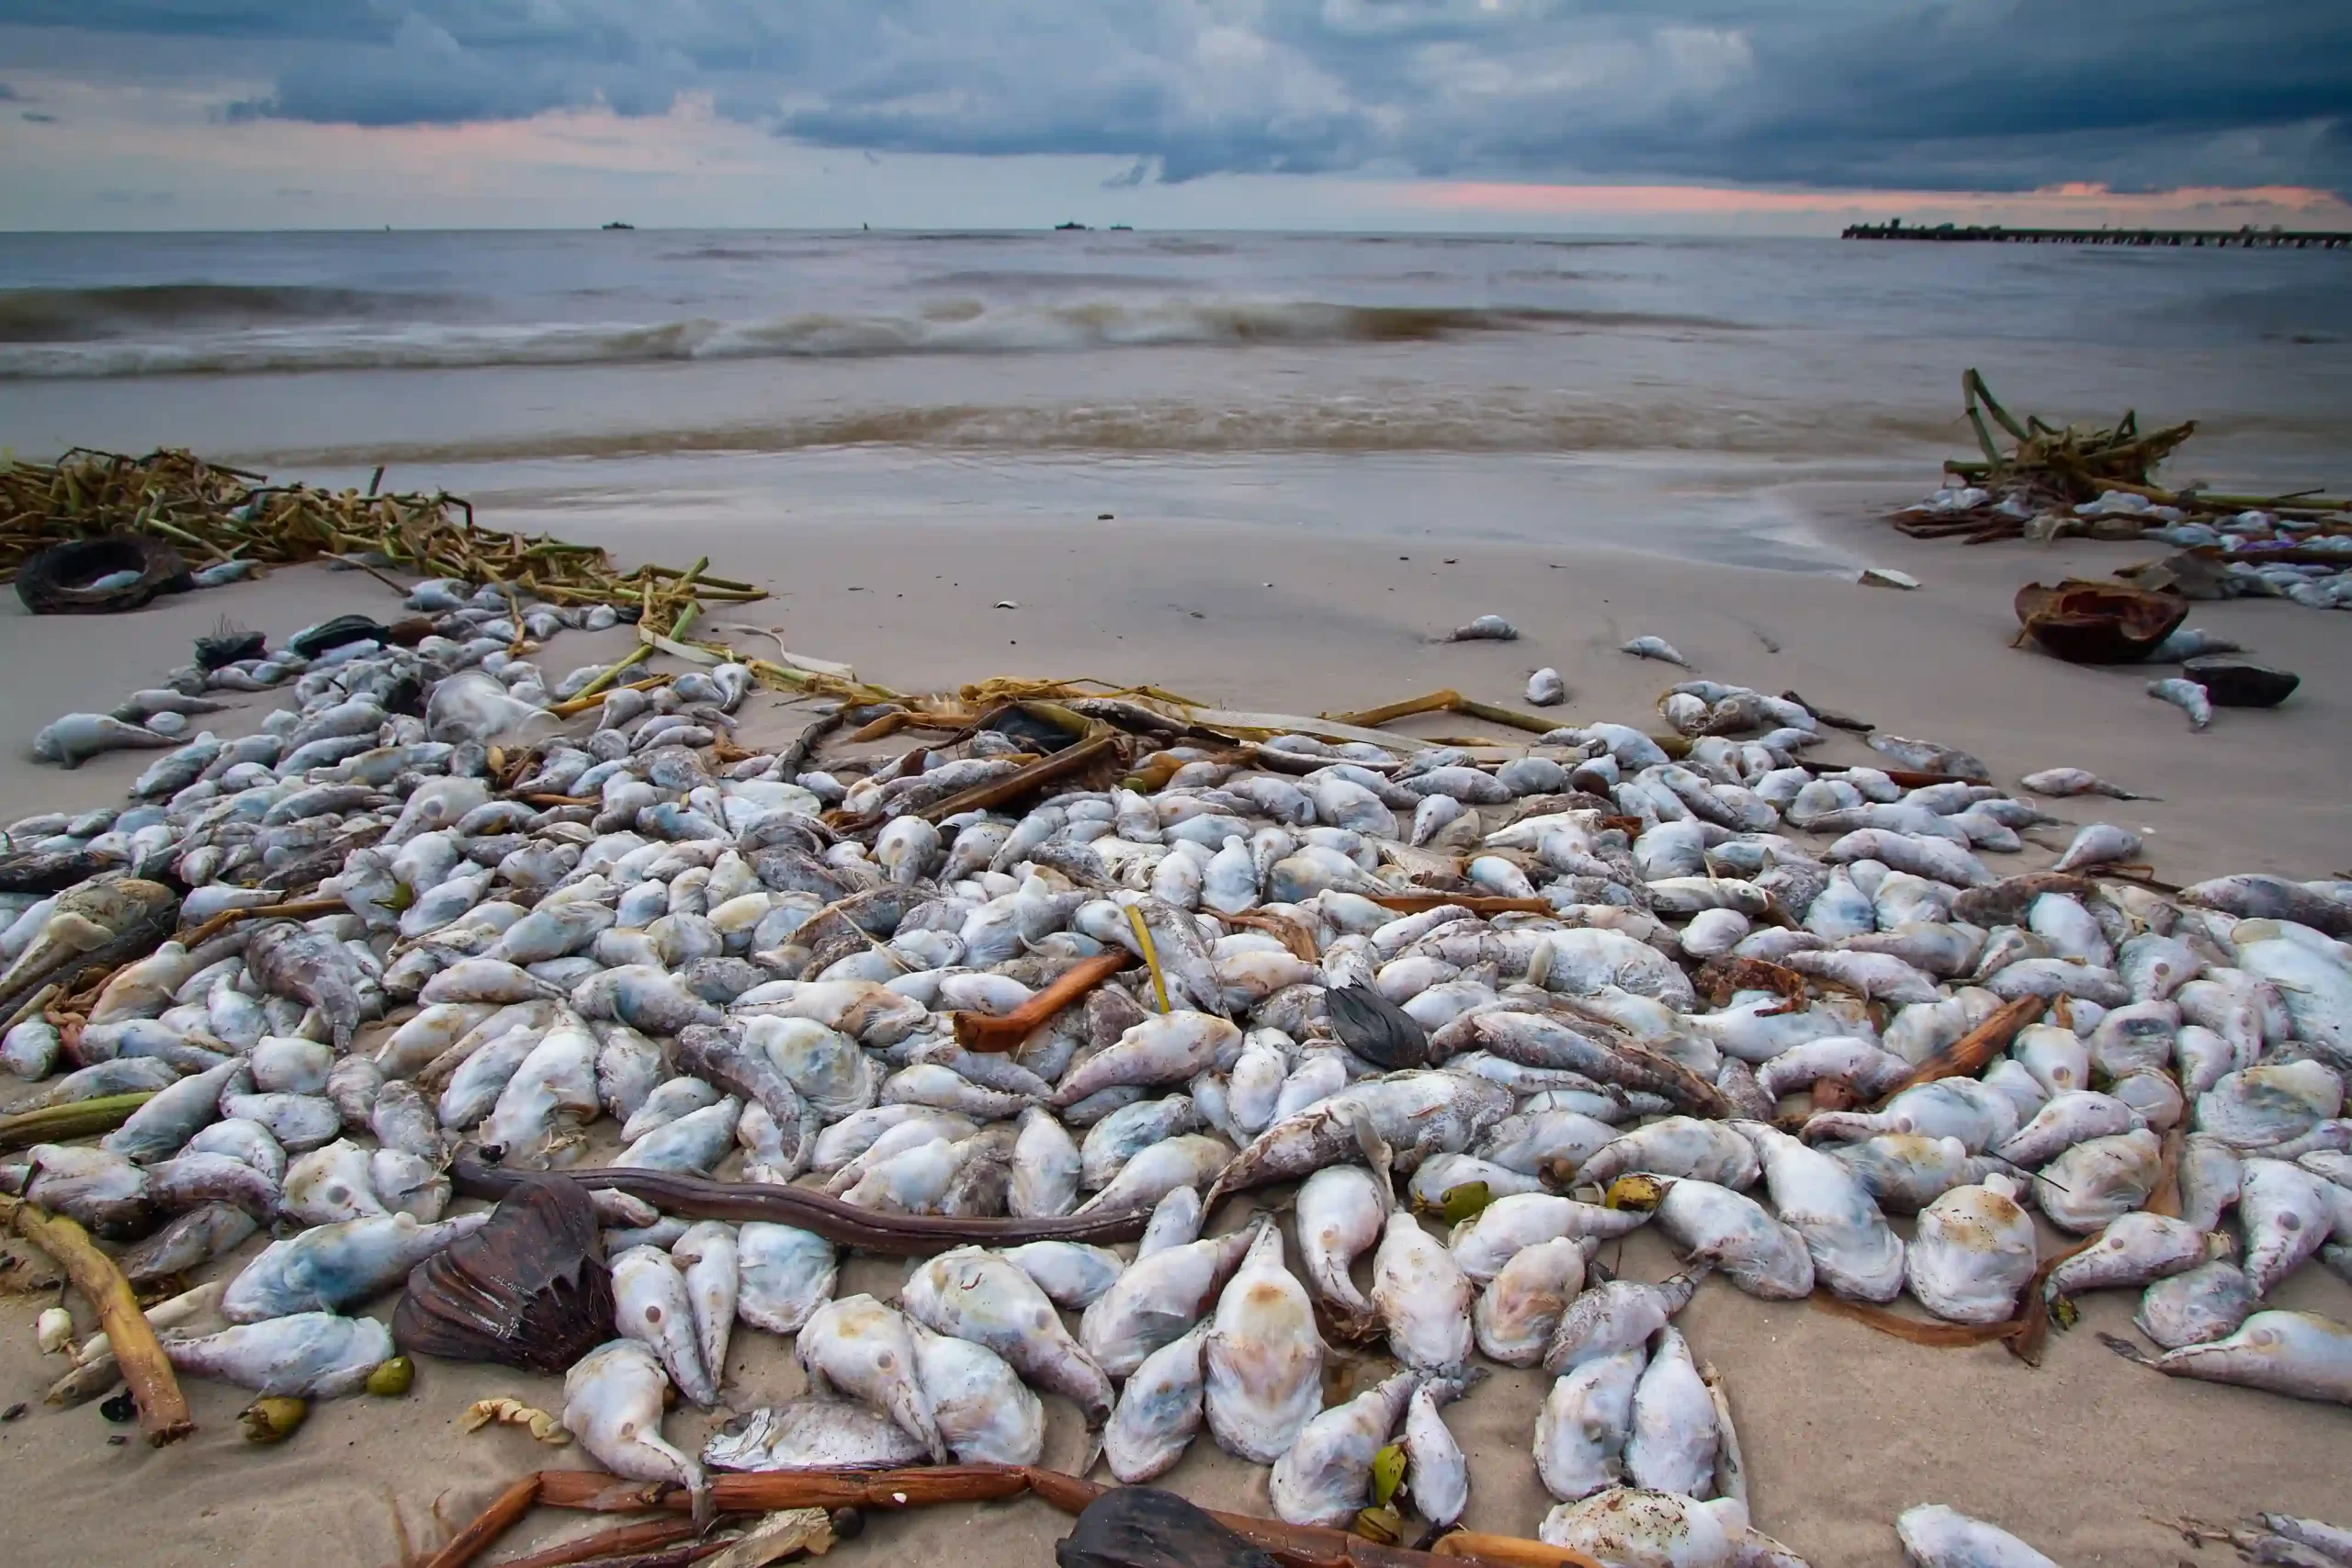 Dead fish washed up on the beach due to pollution.